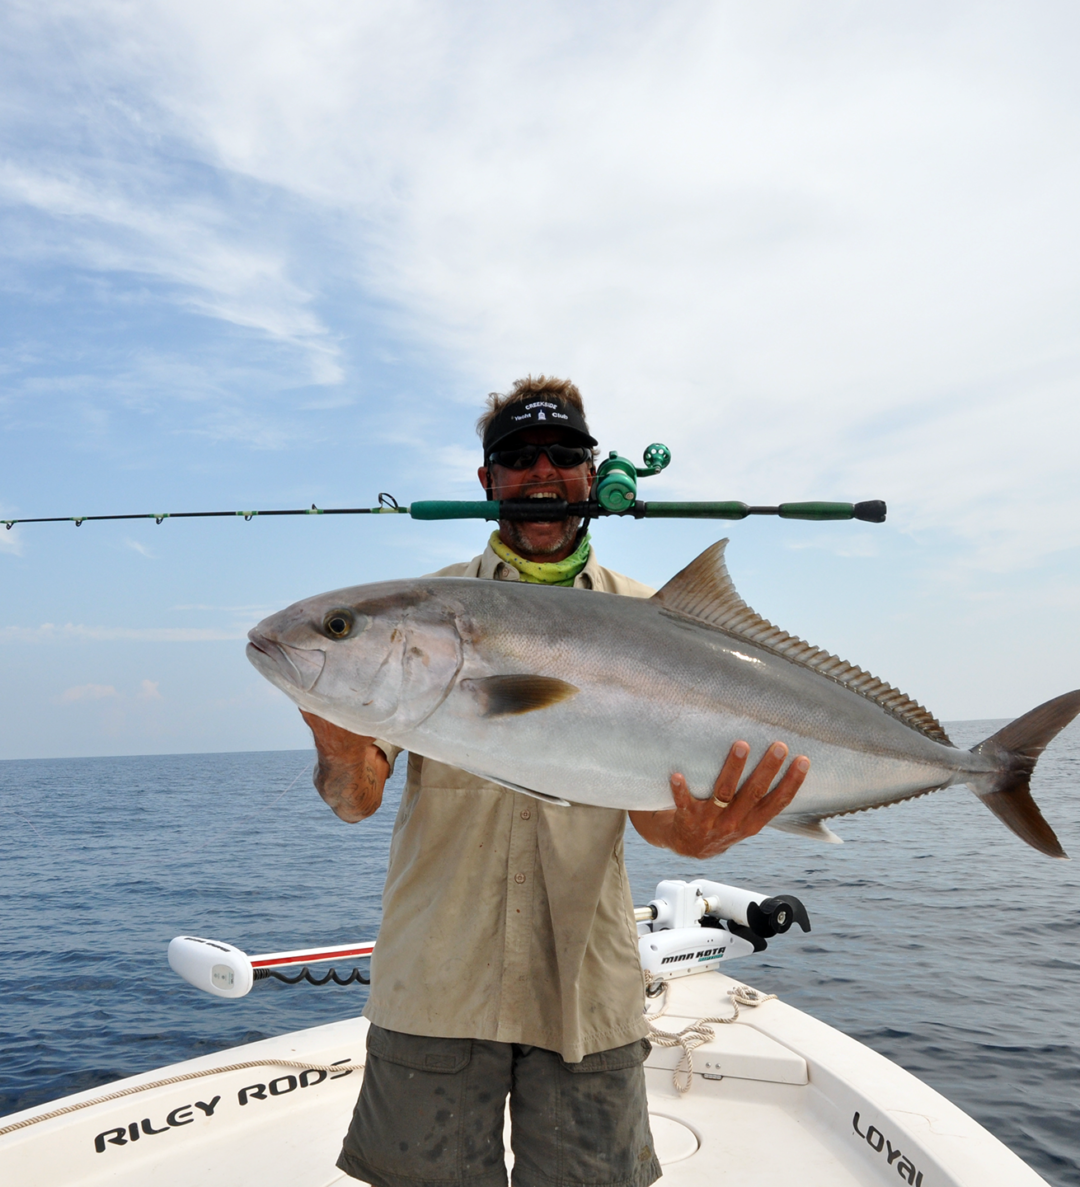 Capt Mike Fishing - NX Fishing Charters - Riley Rods - Team North Fork Composites 5